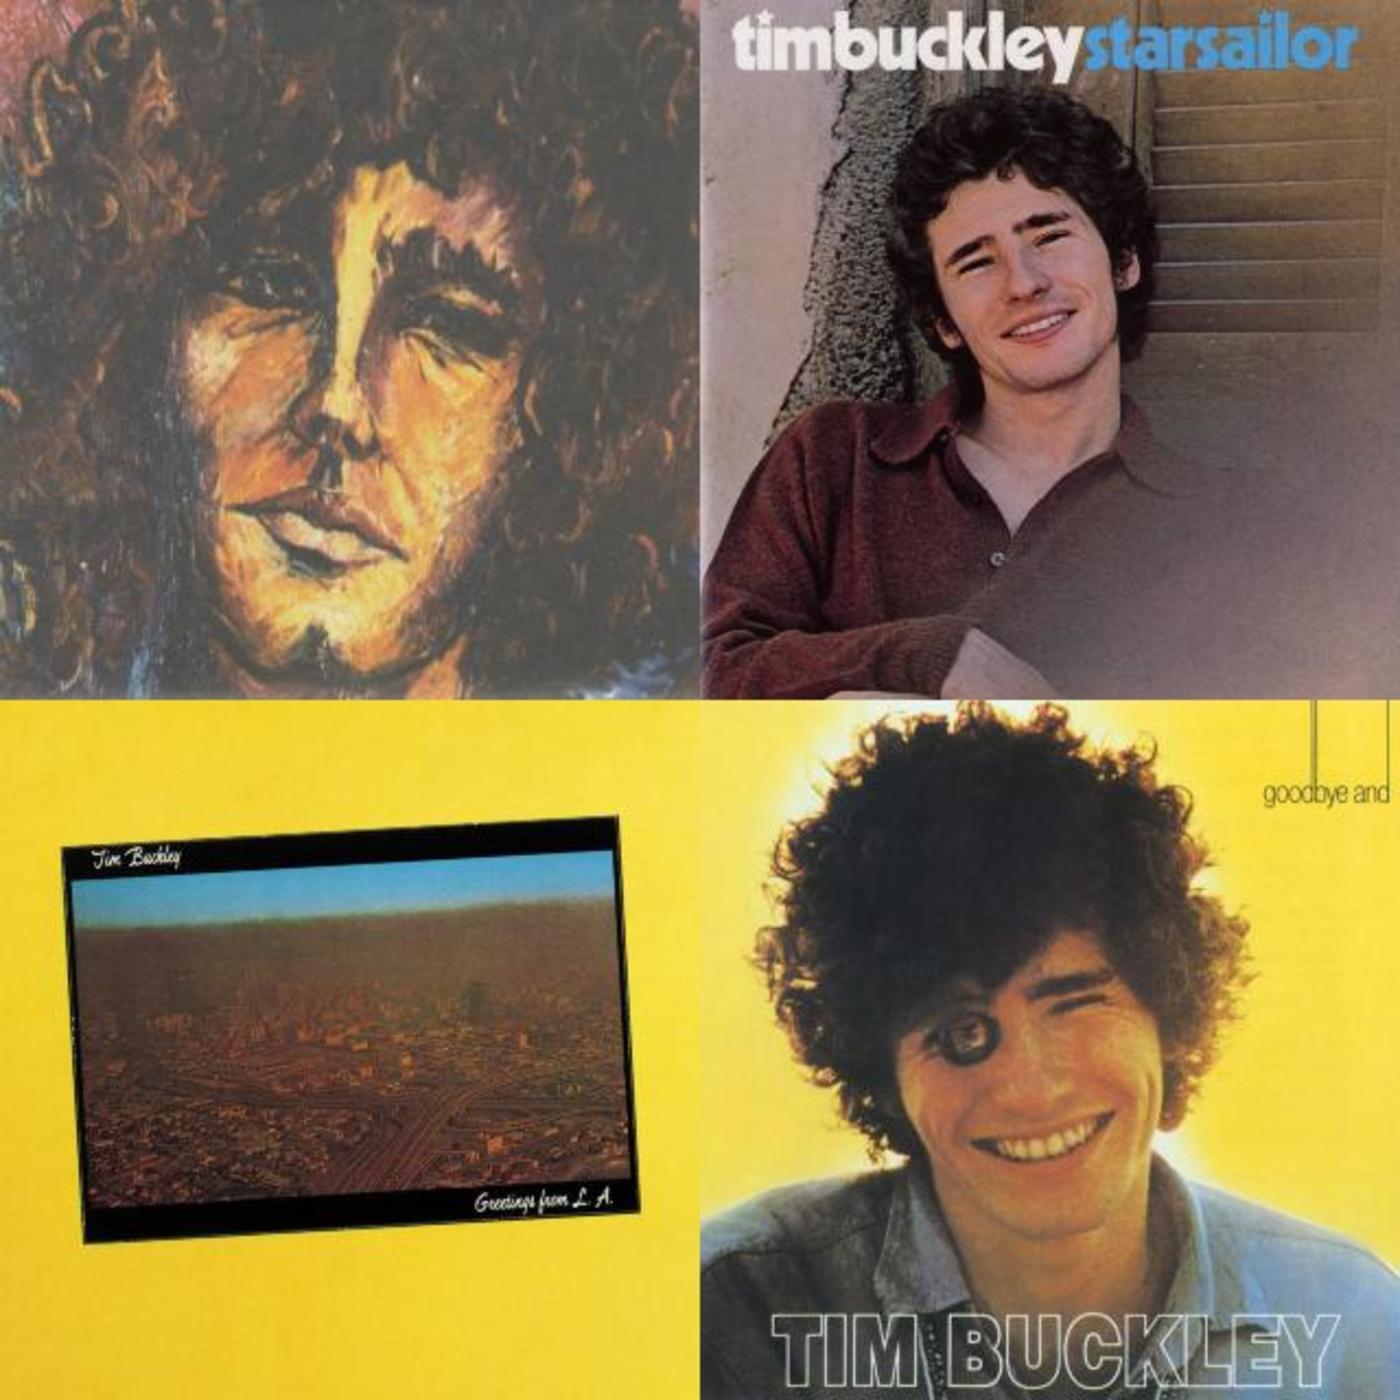 Official Tim Buckley playlist - Song To The Siren, Once I Was, Sweet Surrender, Phantasmagoria in Two, Greetings From LA